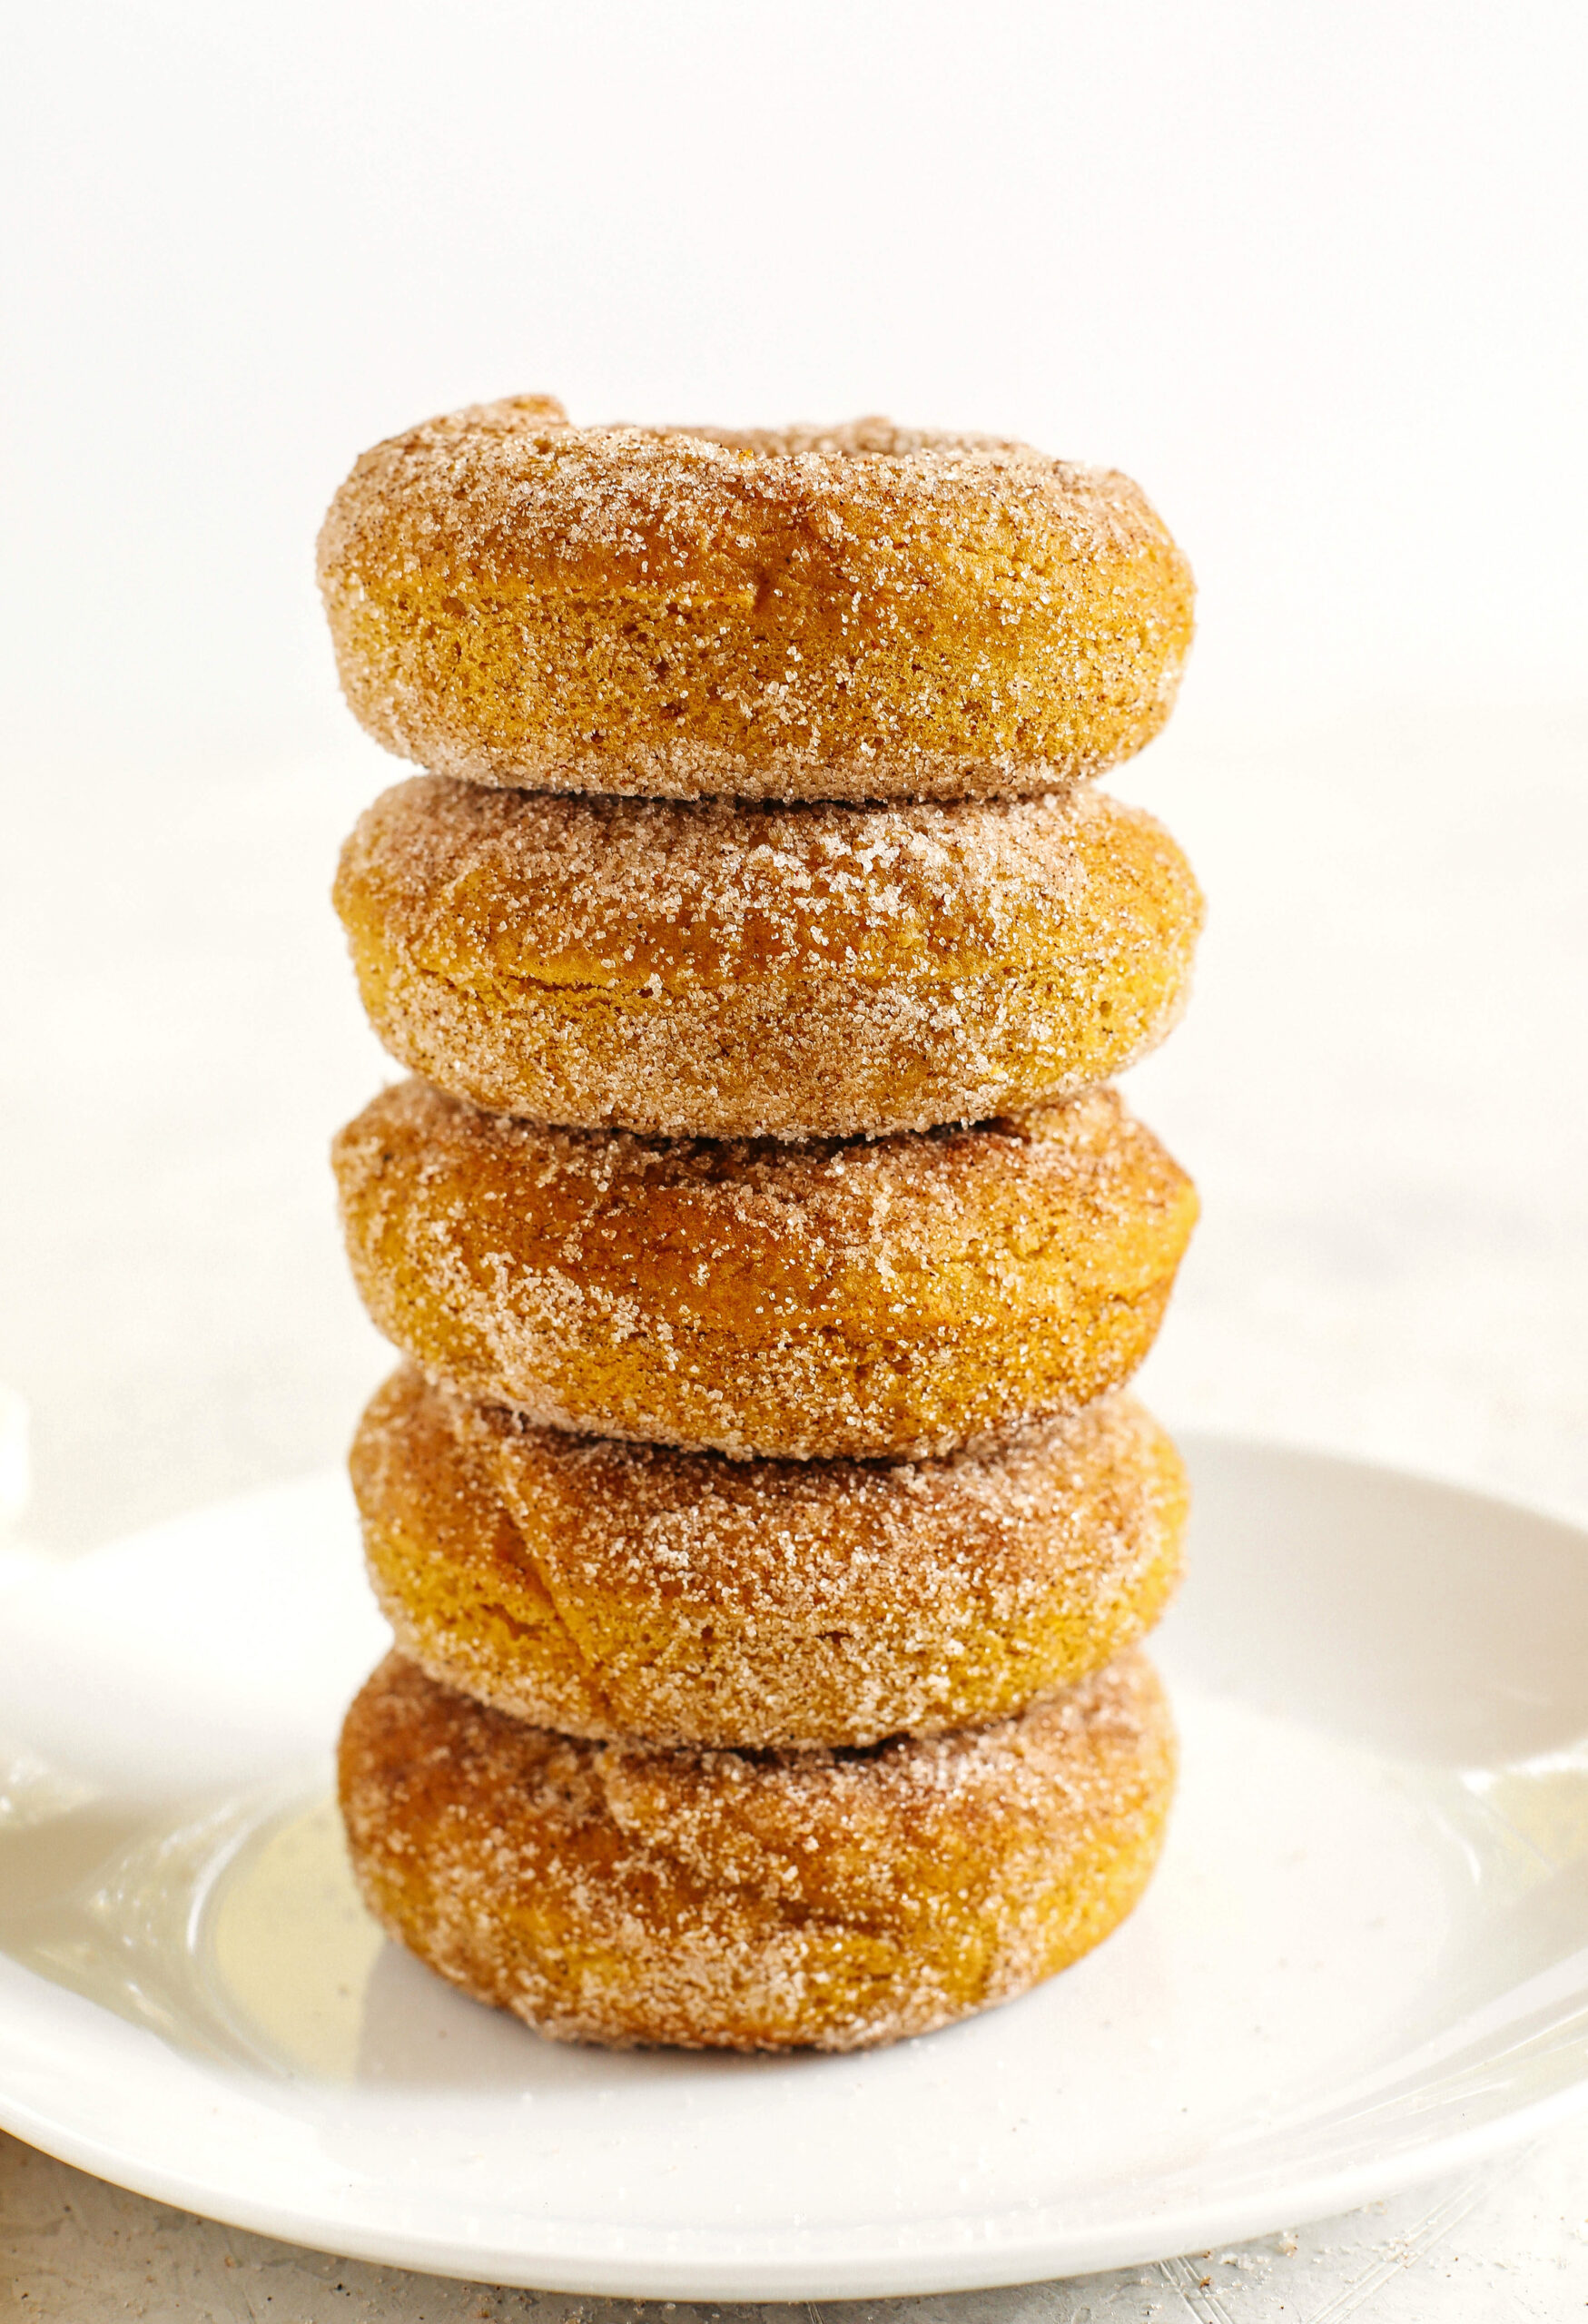 Delicious Gluten-Free Pumpkin Spice Donuts that are soft, lightly sweetened with maple syrup and baked, not fried, for the perfect fall treat!  Loaded with warm spices and coated with cinnamon and sugar!